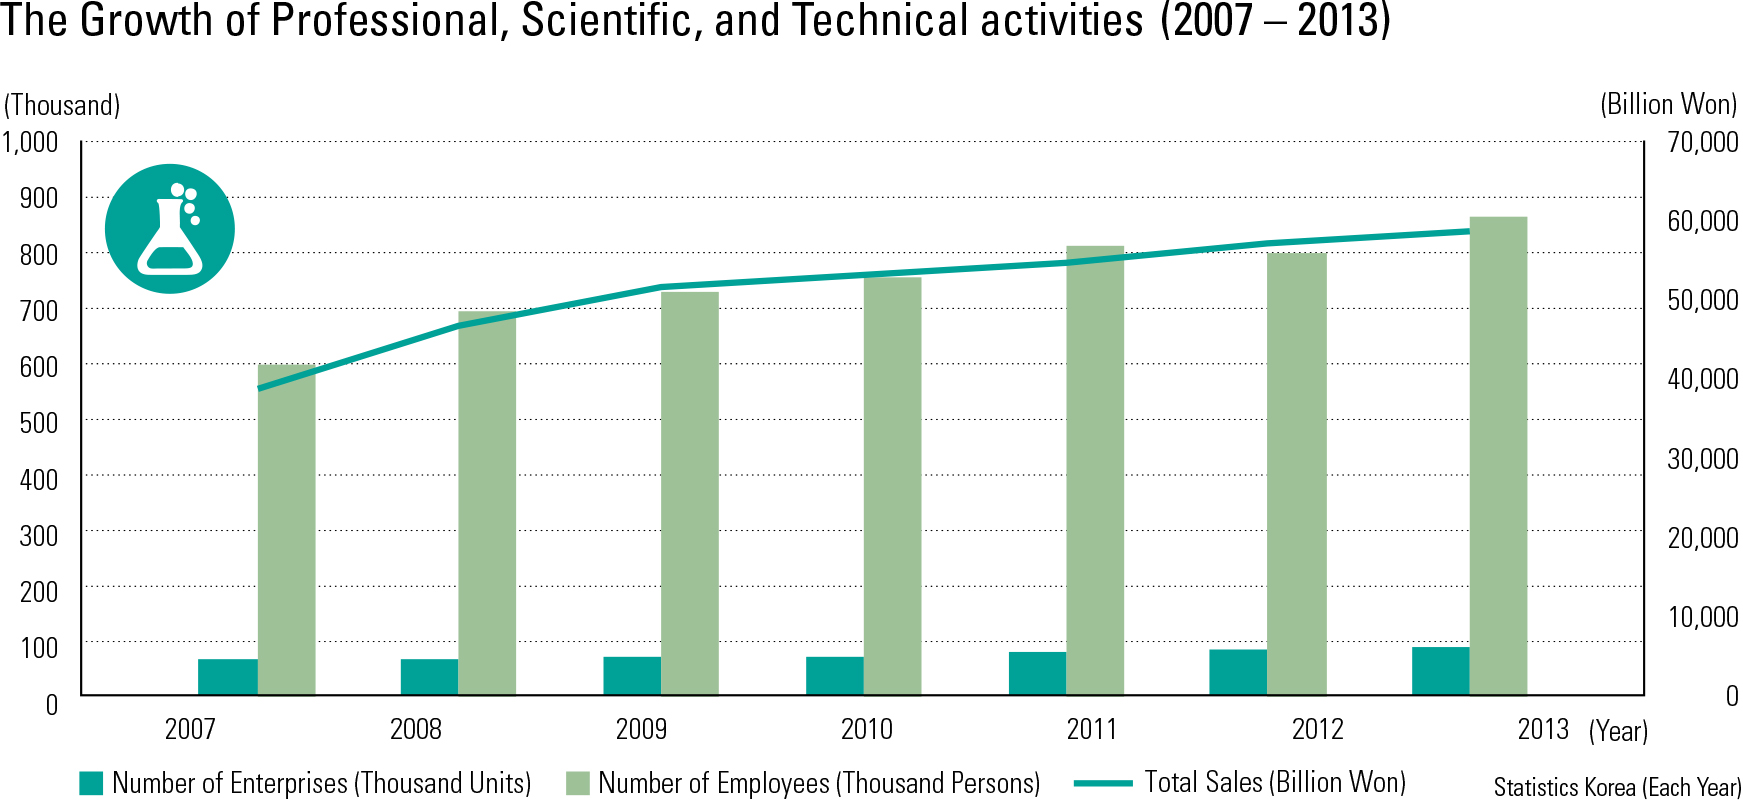 The Growth of Professional, Scientific, and Technical activities (2007 – 2013)<p class="oz_zoom" zimg="http://imagedata.cafe24.com/us_3/us3_190-2_2.jpg"><span style="font-family:Nanum Myeongjo;"><span style="font-size:18px;"><span class="label label-danger">UPDATE DATA</span></span></p>